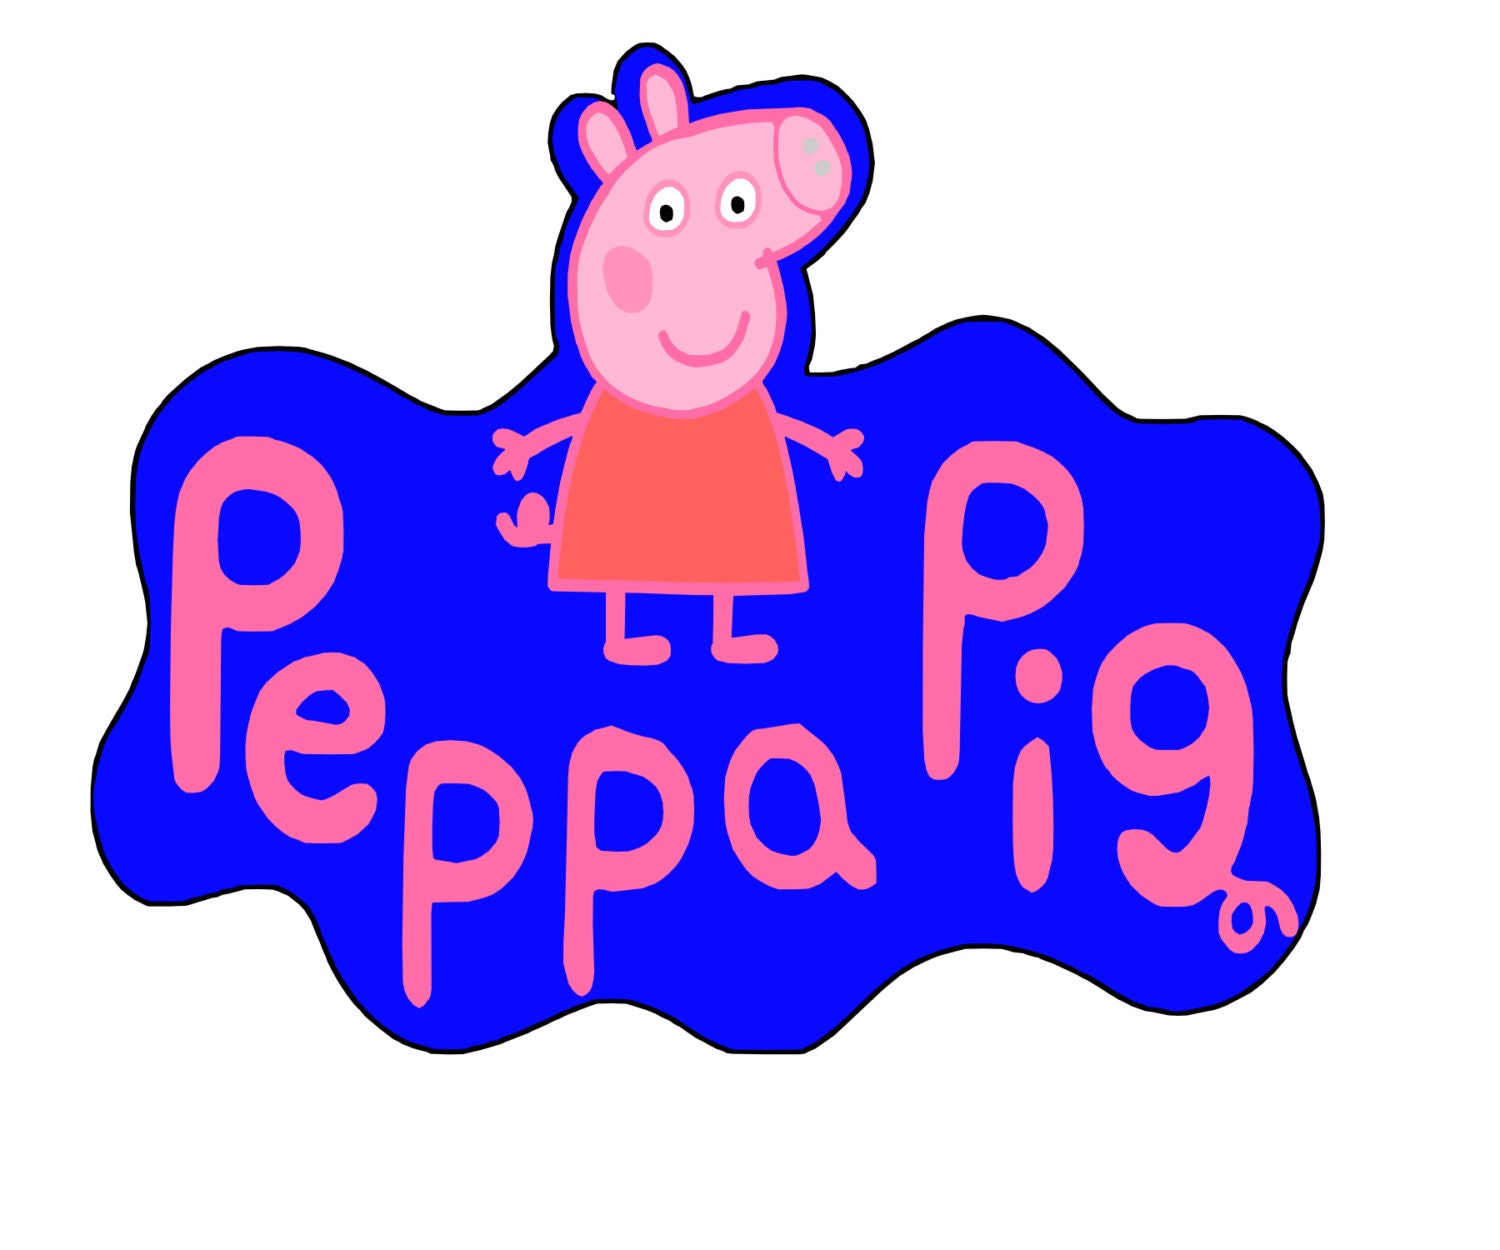 Peppa Pig SVG Instant Dowmload by SweetRaegans on Etsy